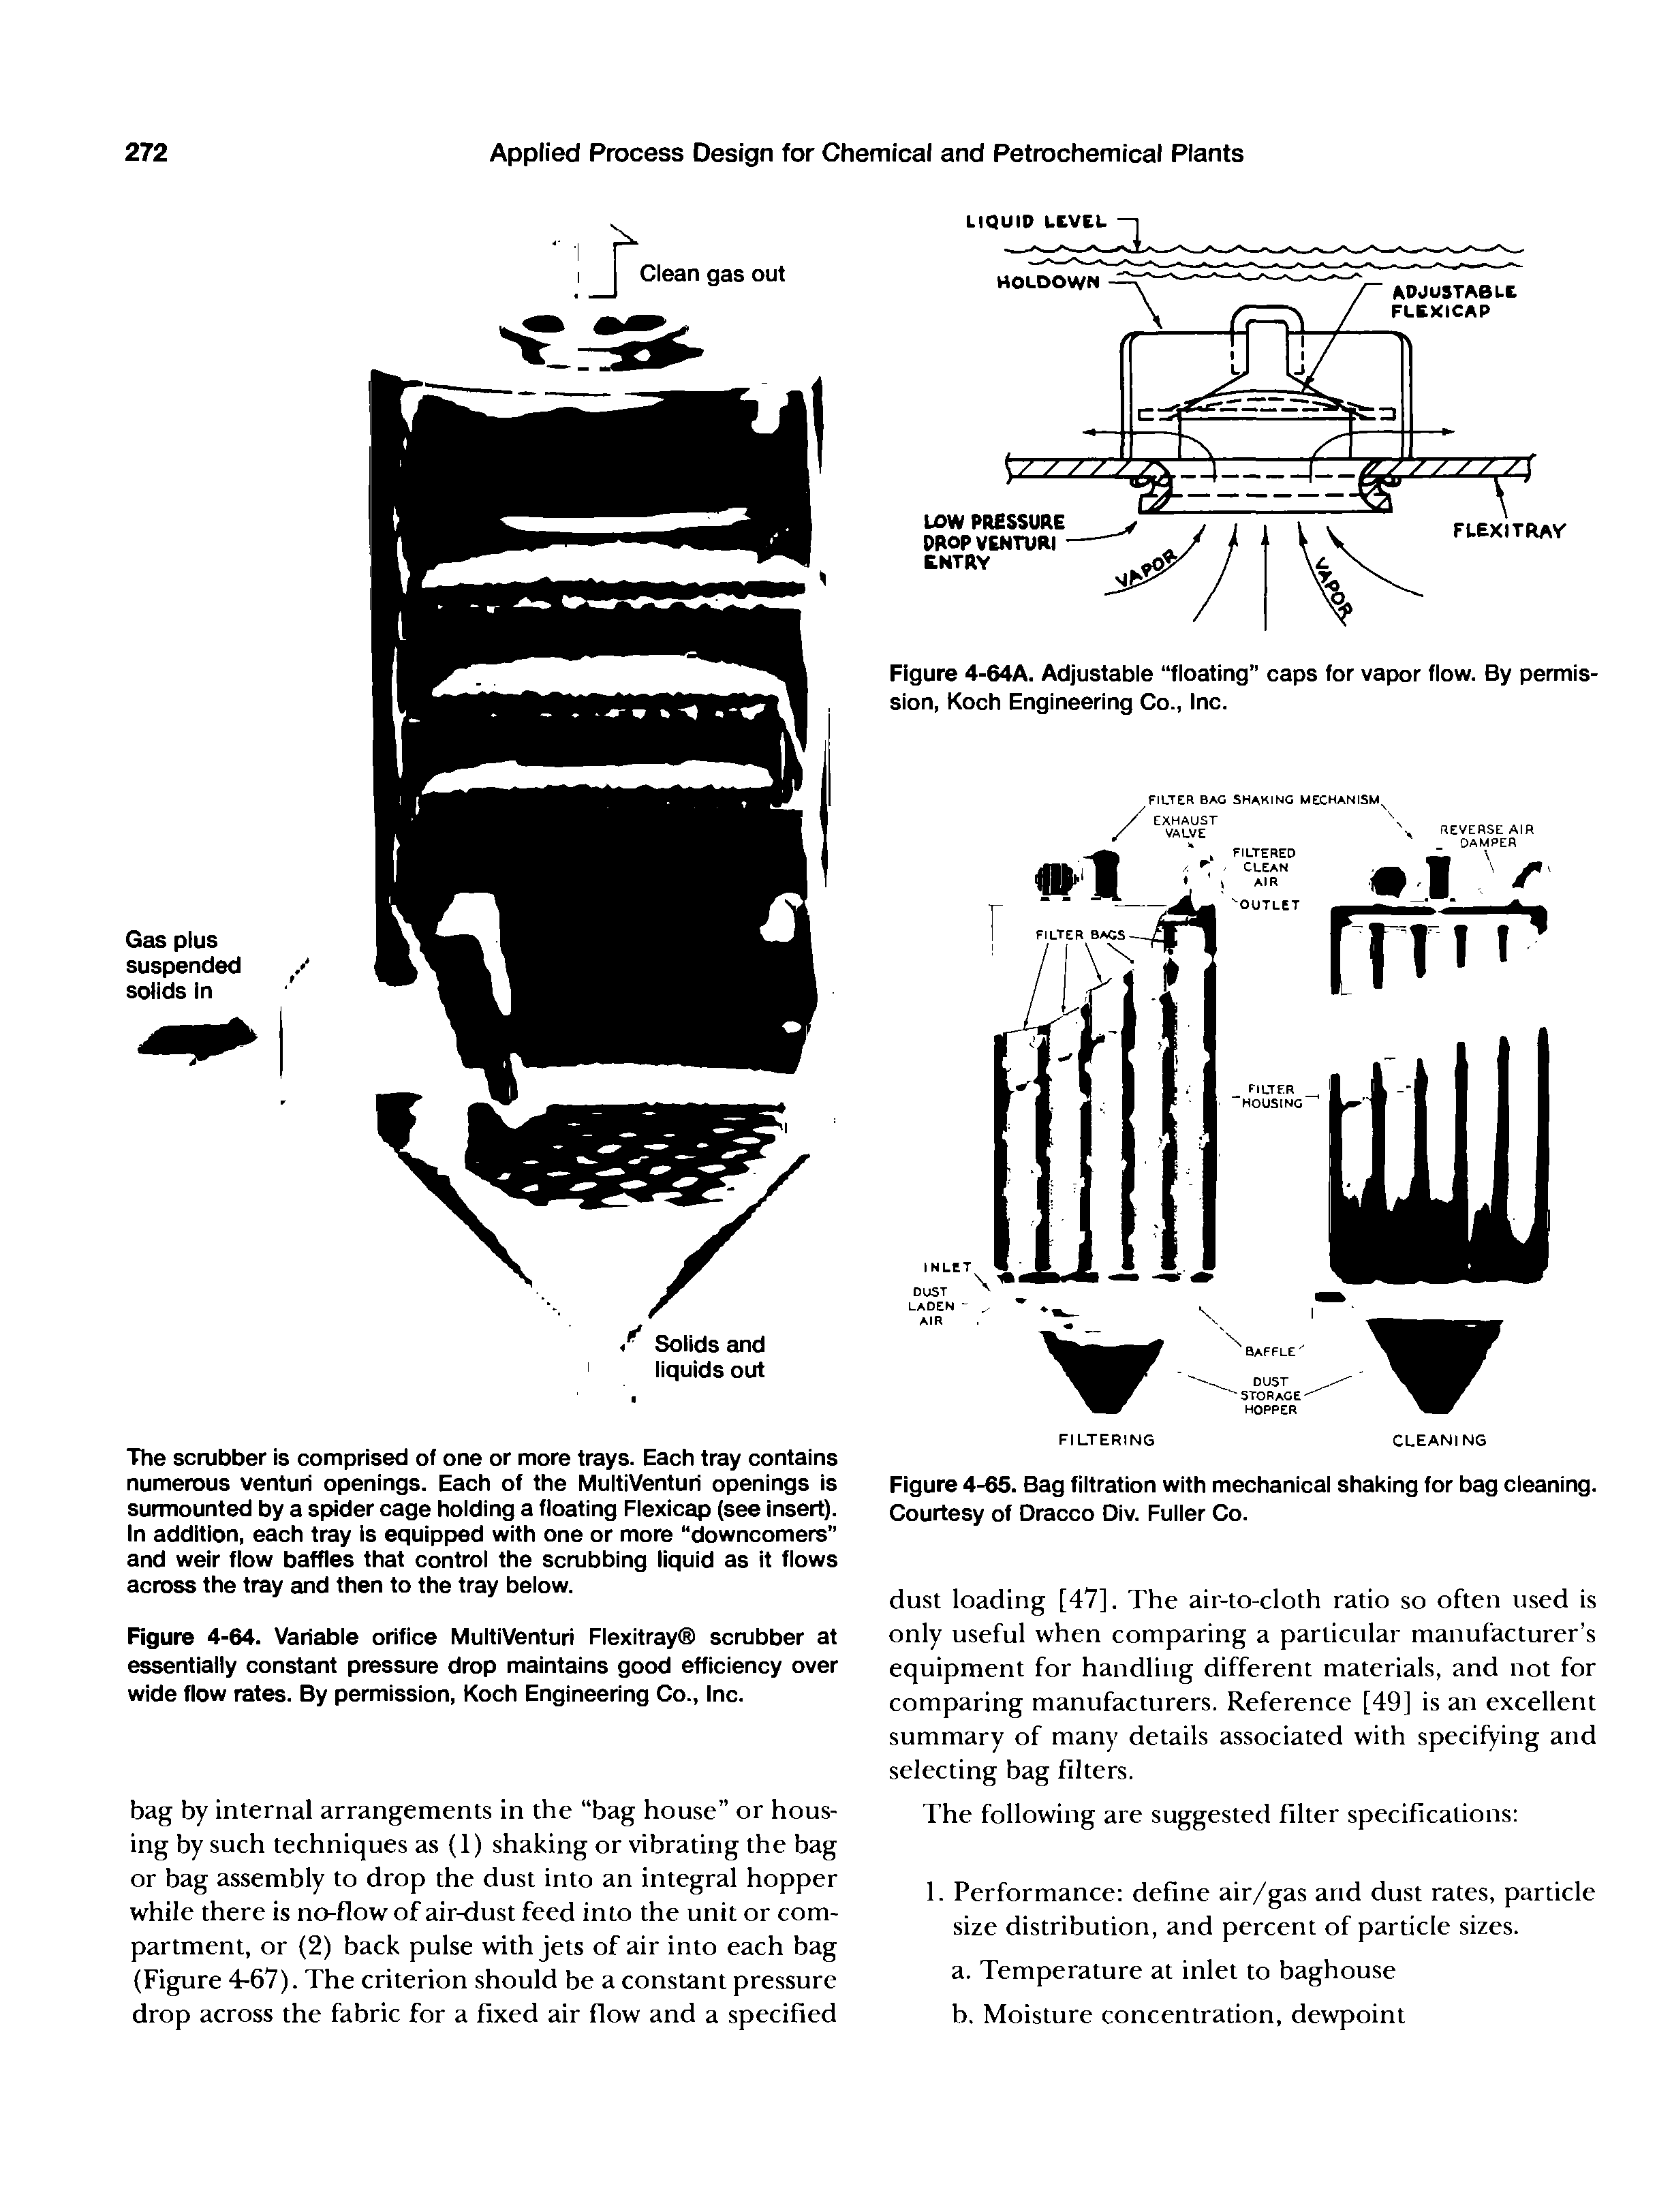 Figure 4-64A. Adjustable floating" caps for vapor flow. By permission, Koch Engineering Co., Inc.